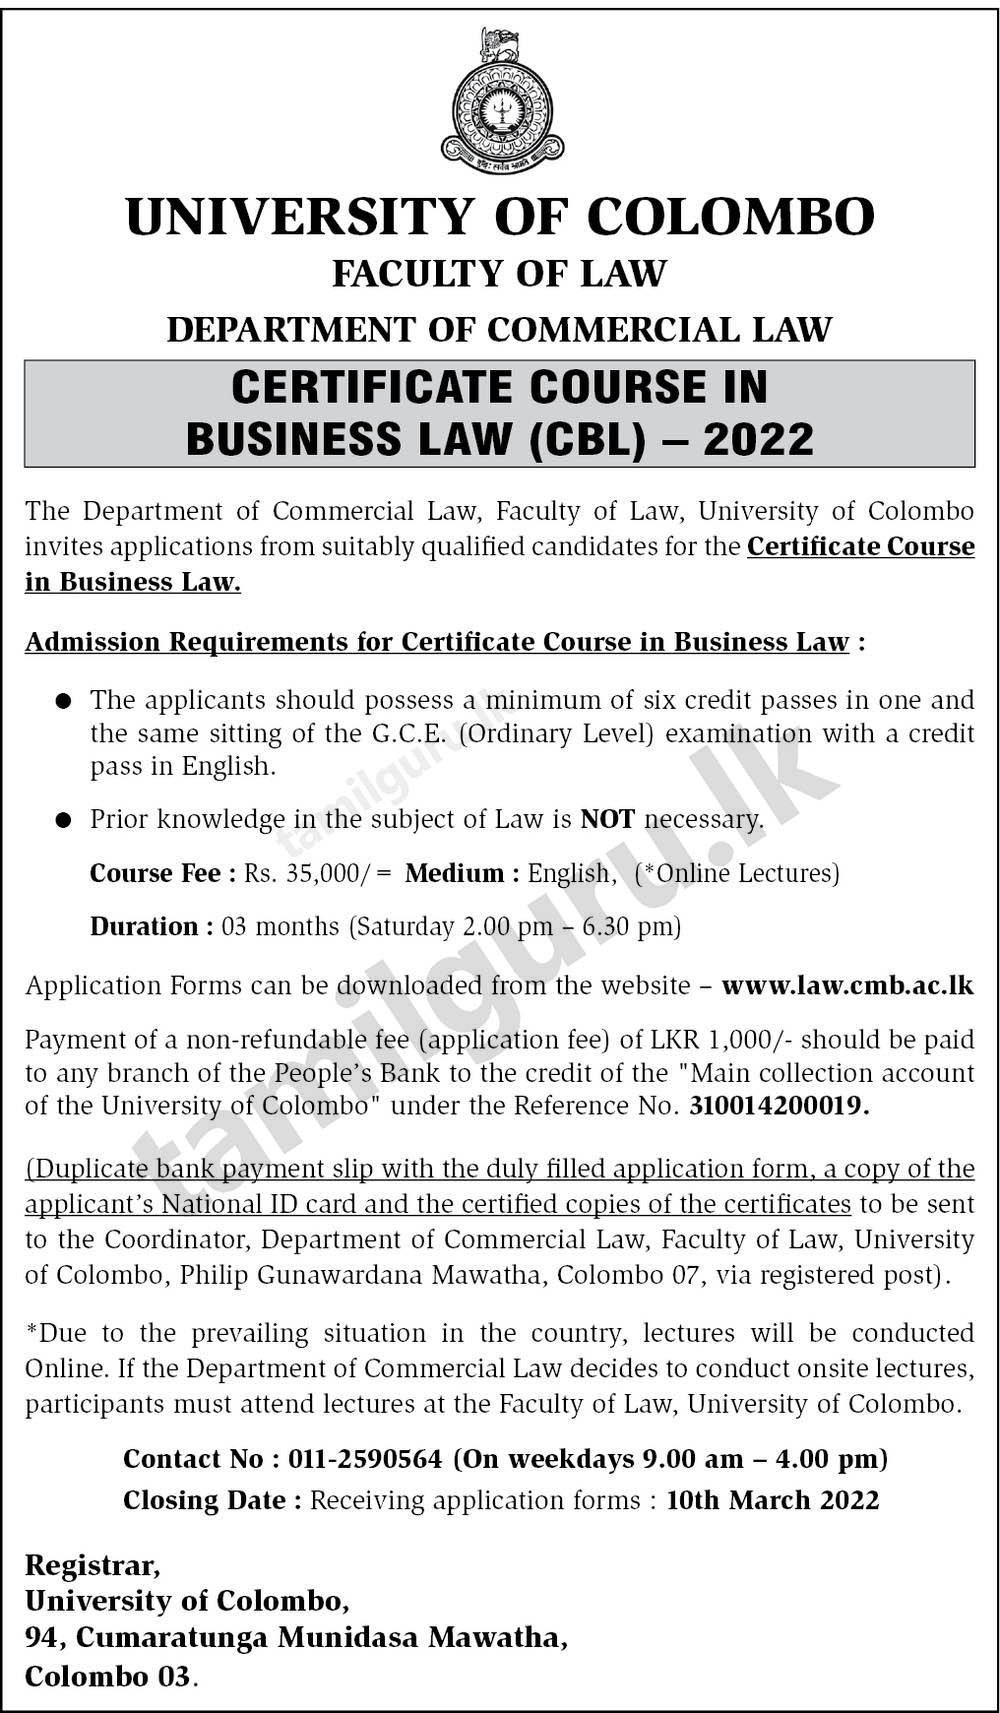 Certificate Course in Business Law (CBL) 2022 - University of Colombo - Notice in English